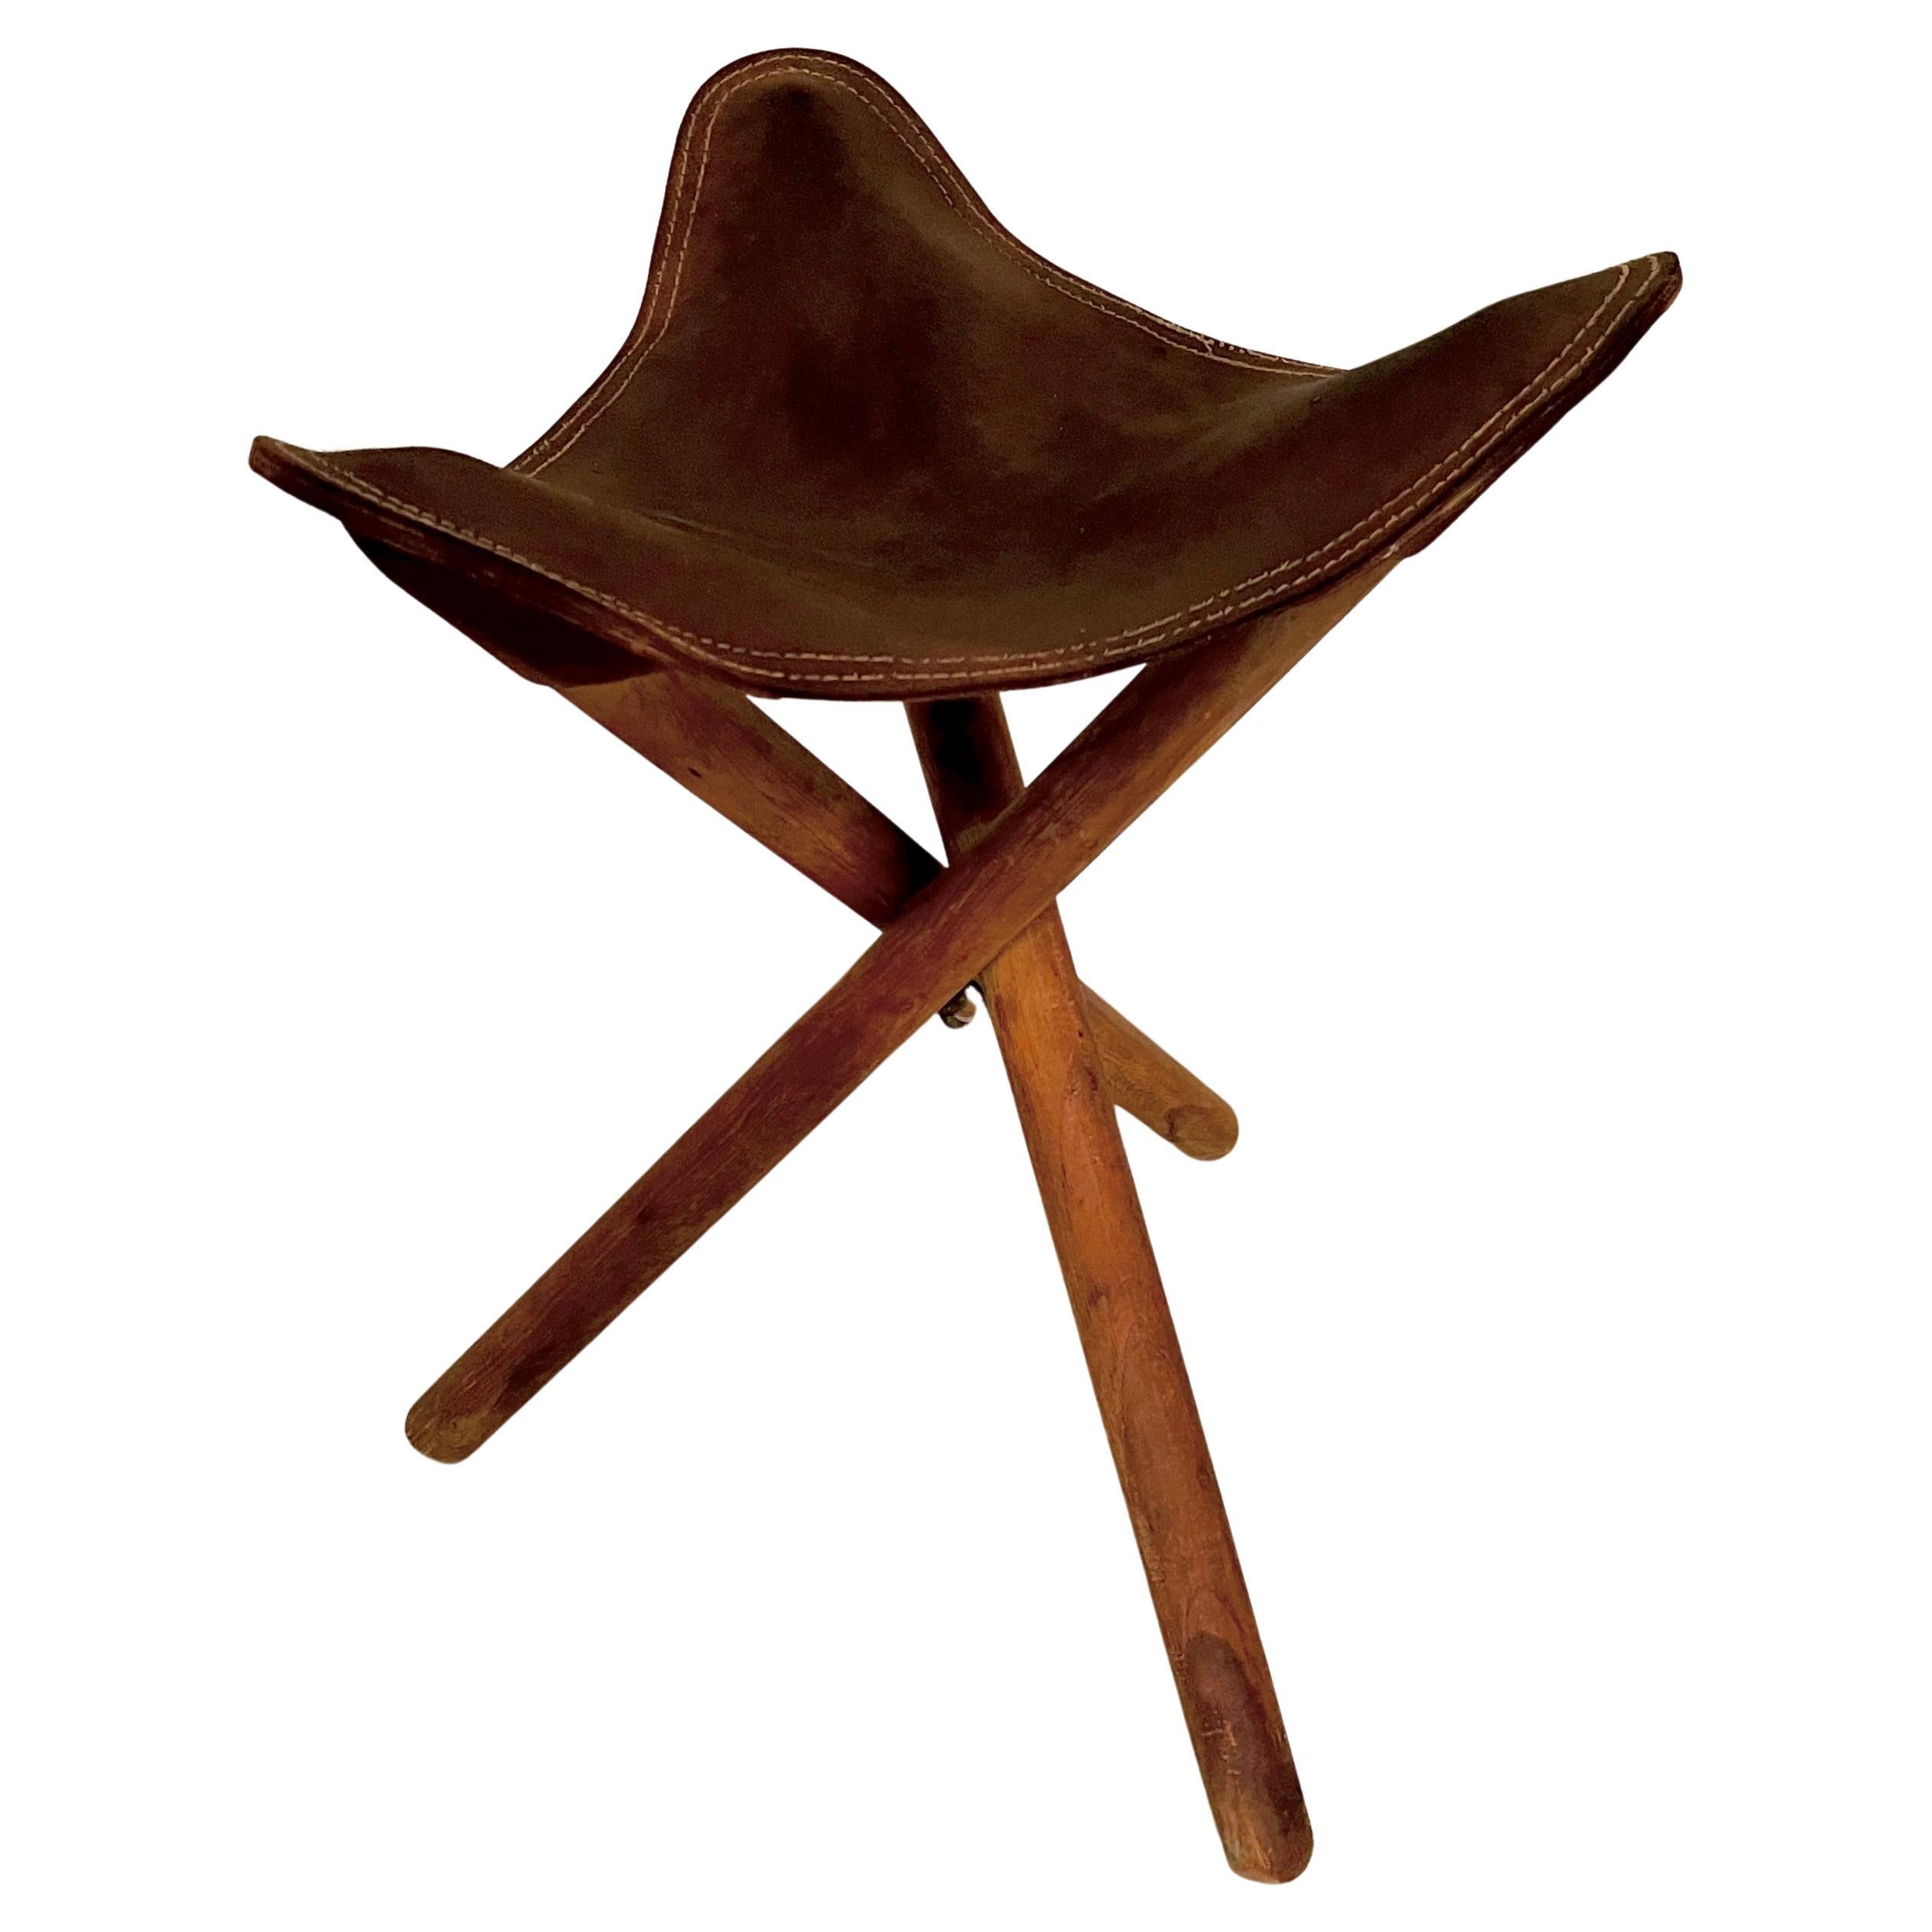 Tipod Leg Wooden Stool with Leather Seat